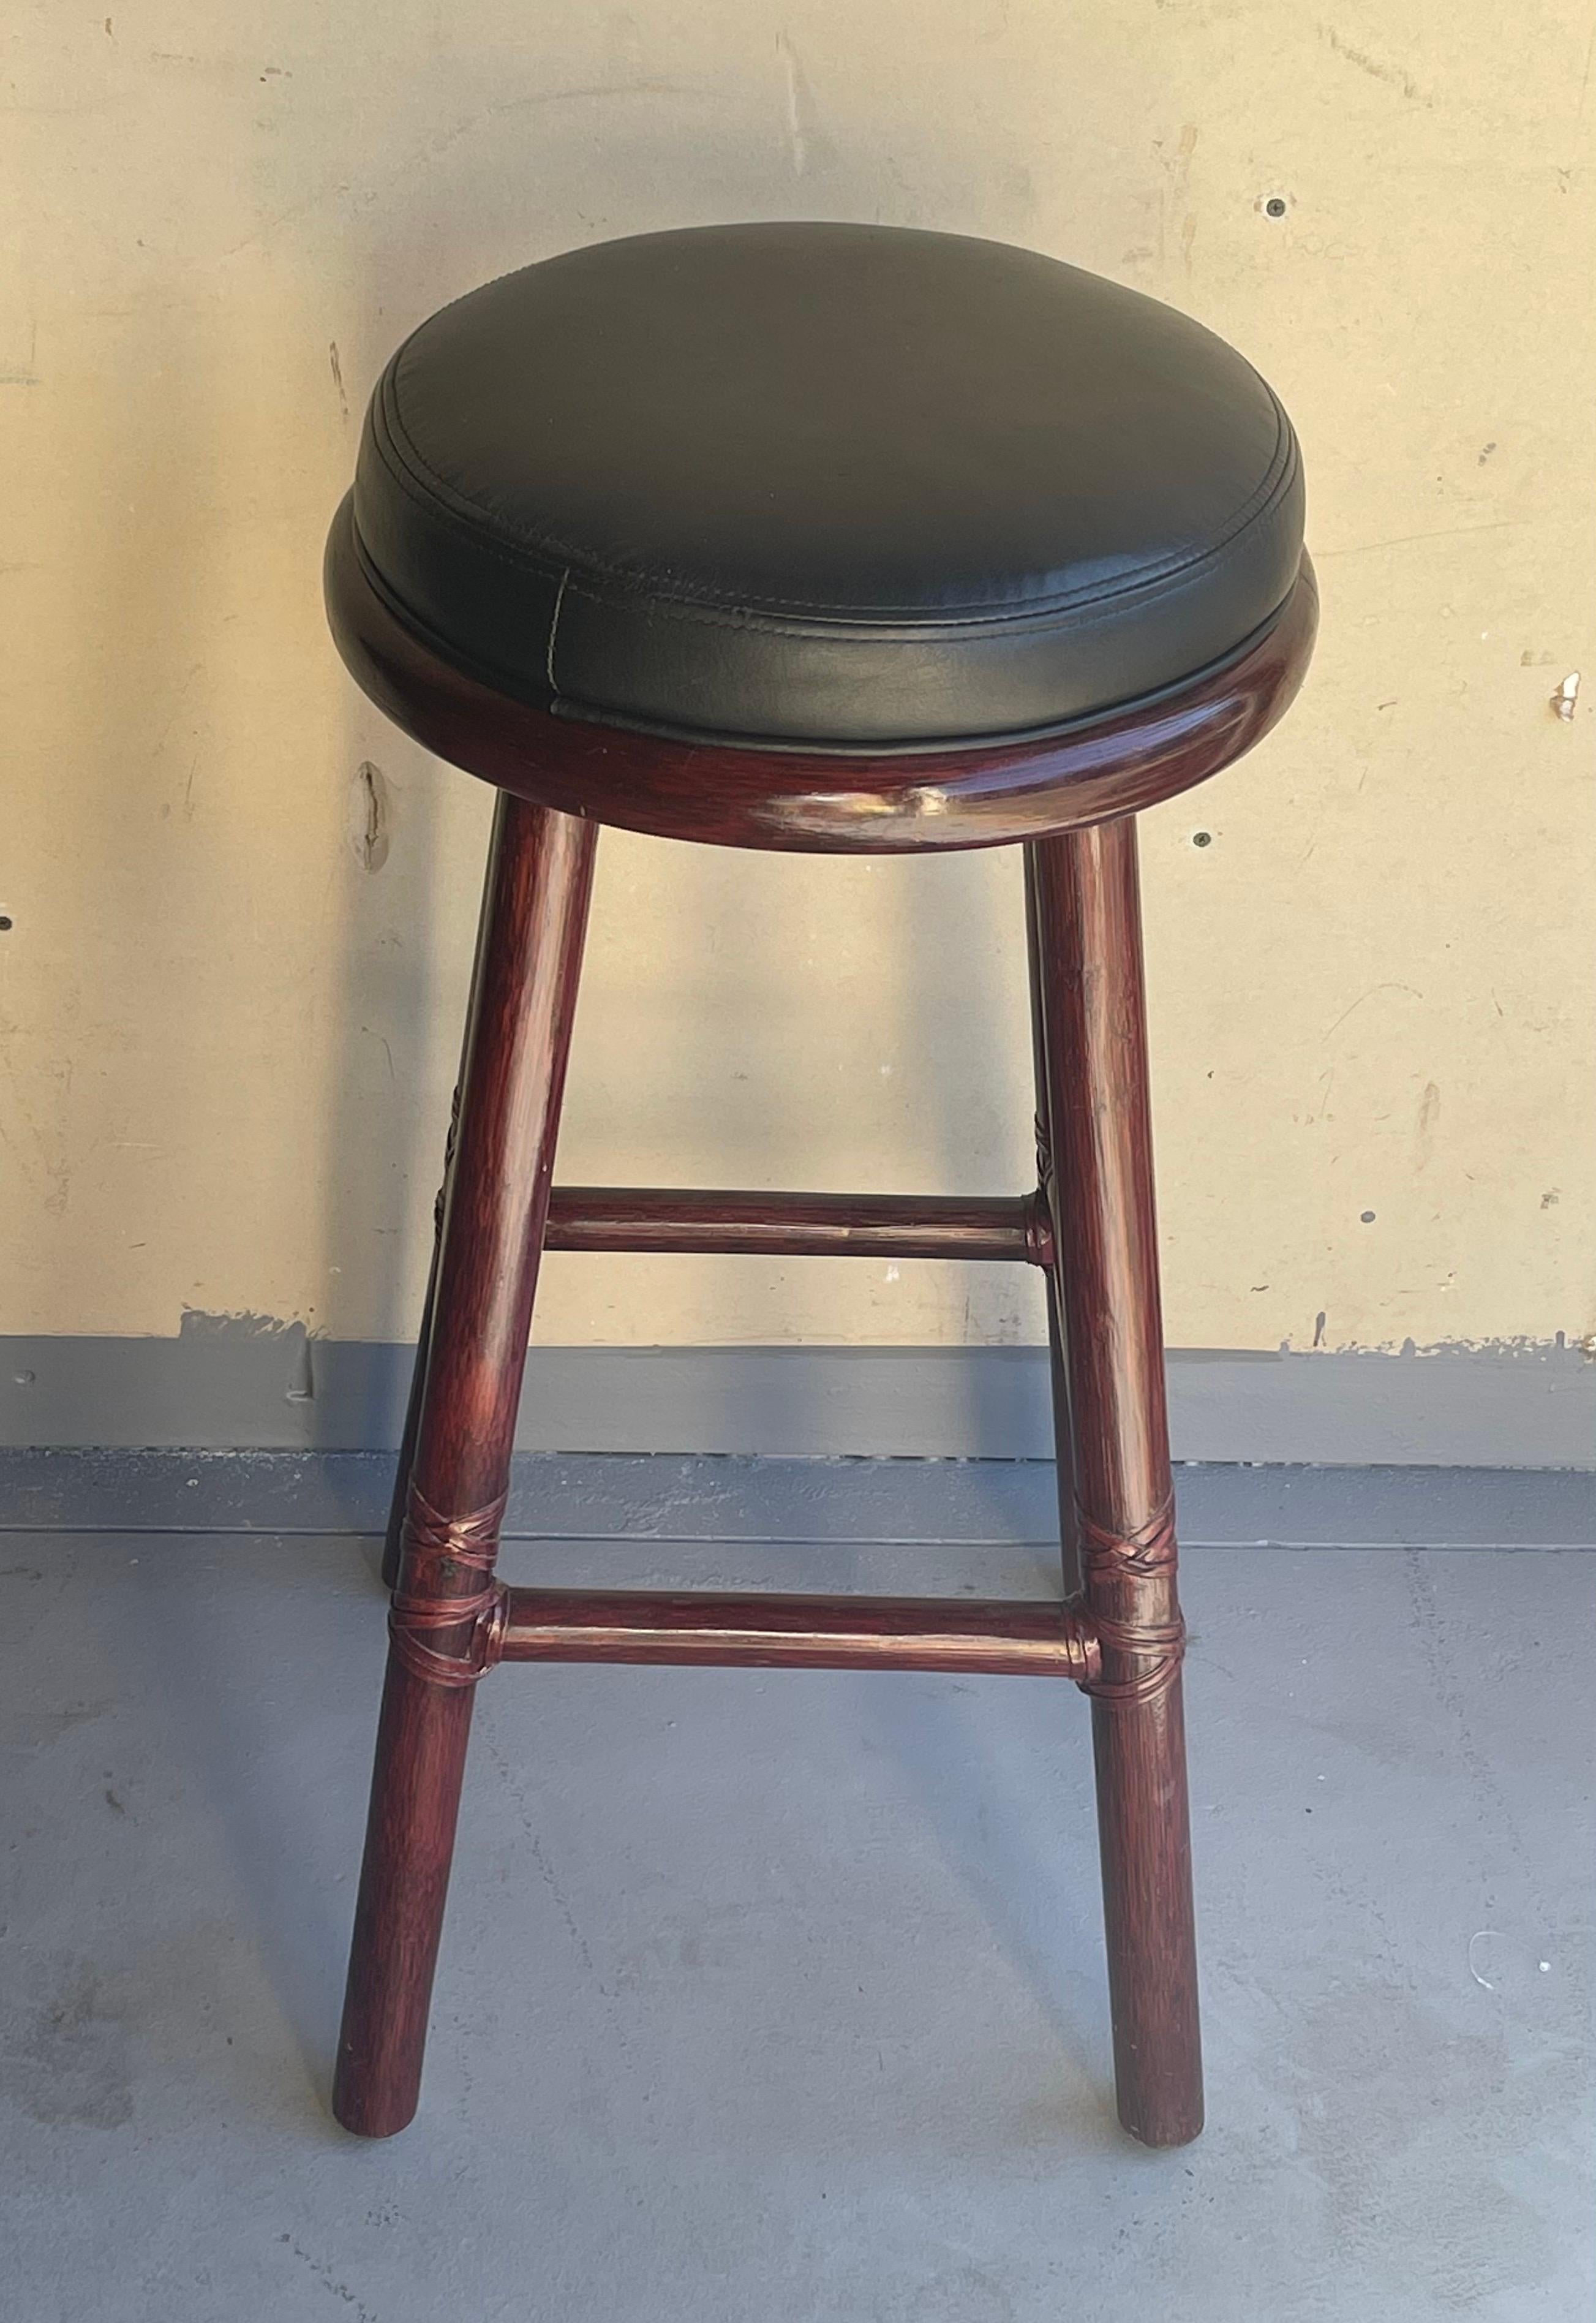 20th Century Set of Three Bamboo & Leather Bar Stools by McGuire Furniture Co. For Sale